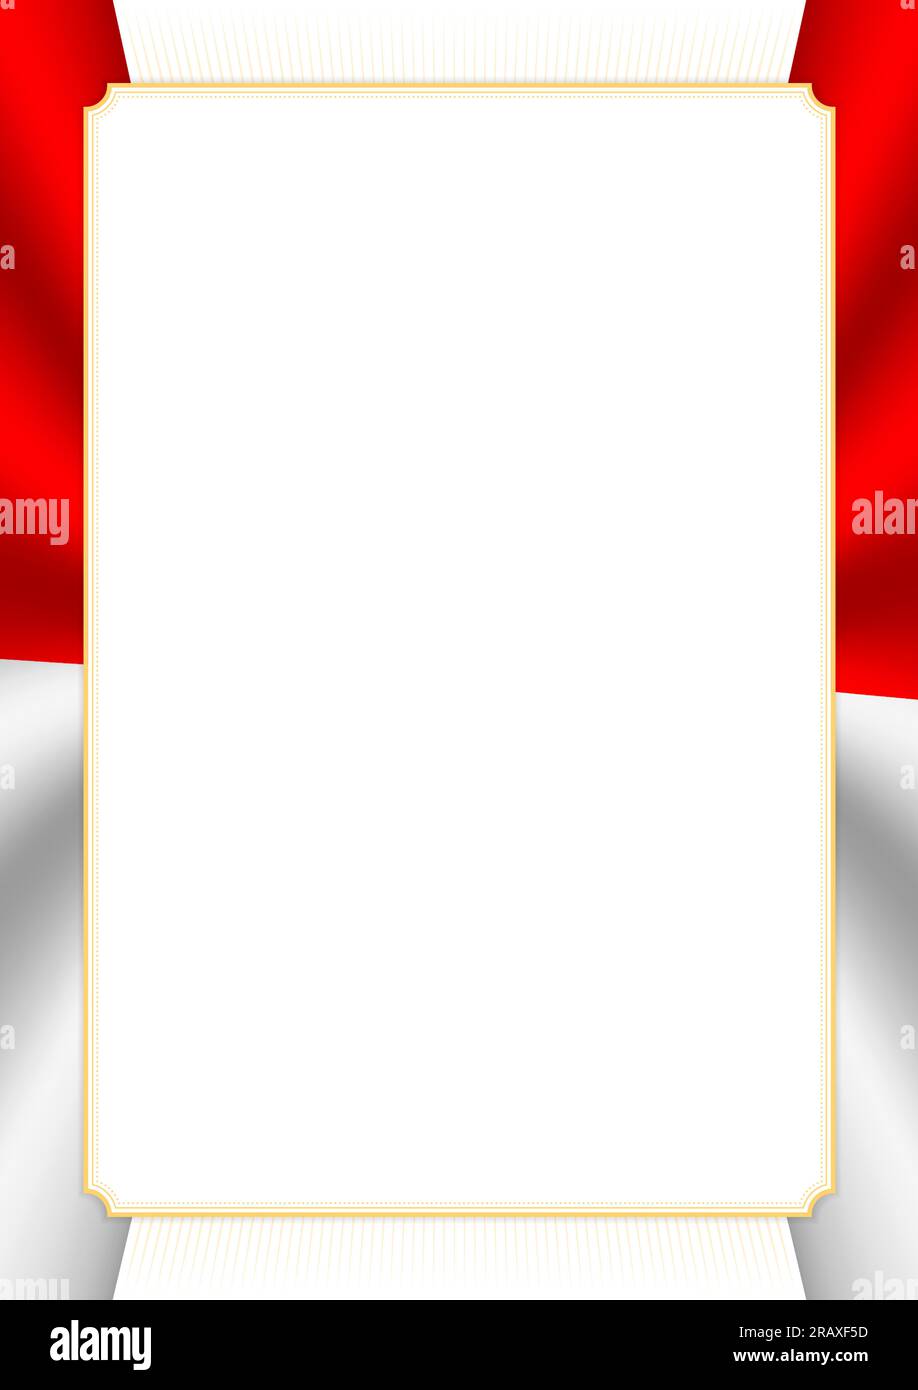 Vertical frame and border with colors of Indonesia flag, template ...